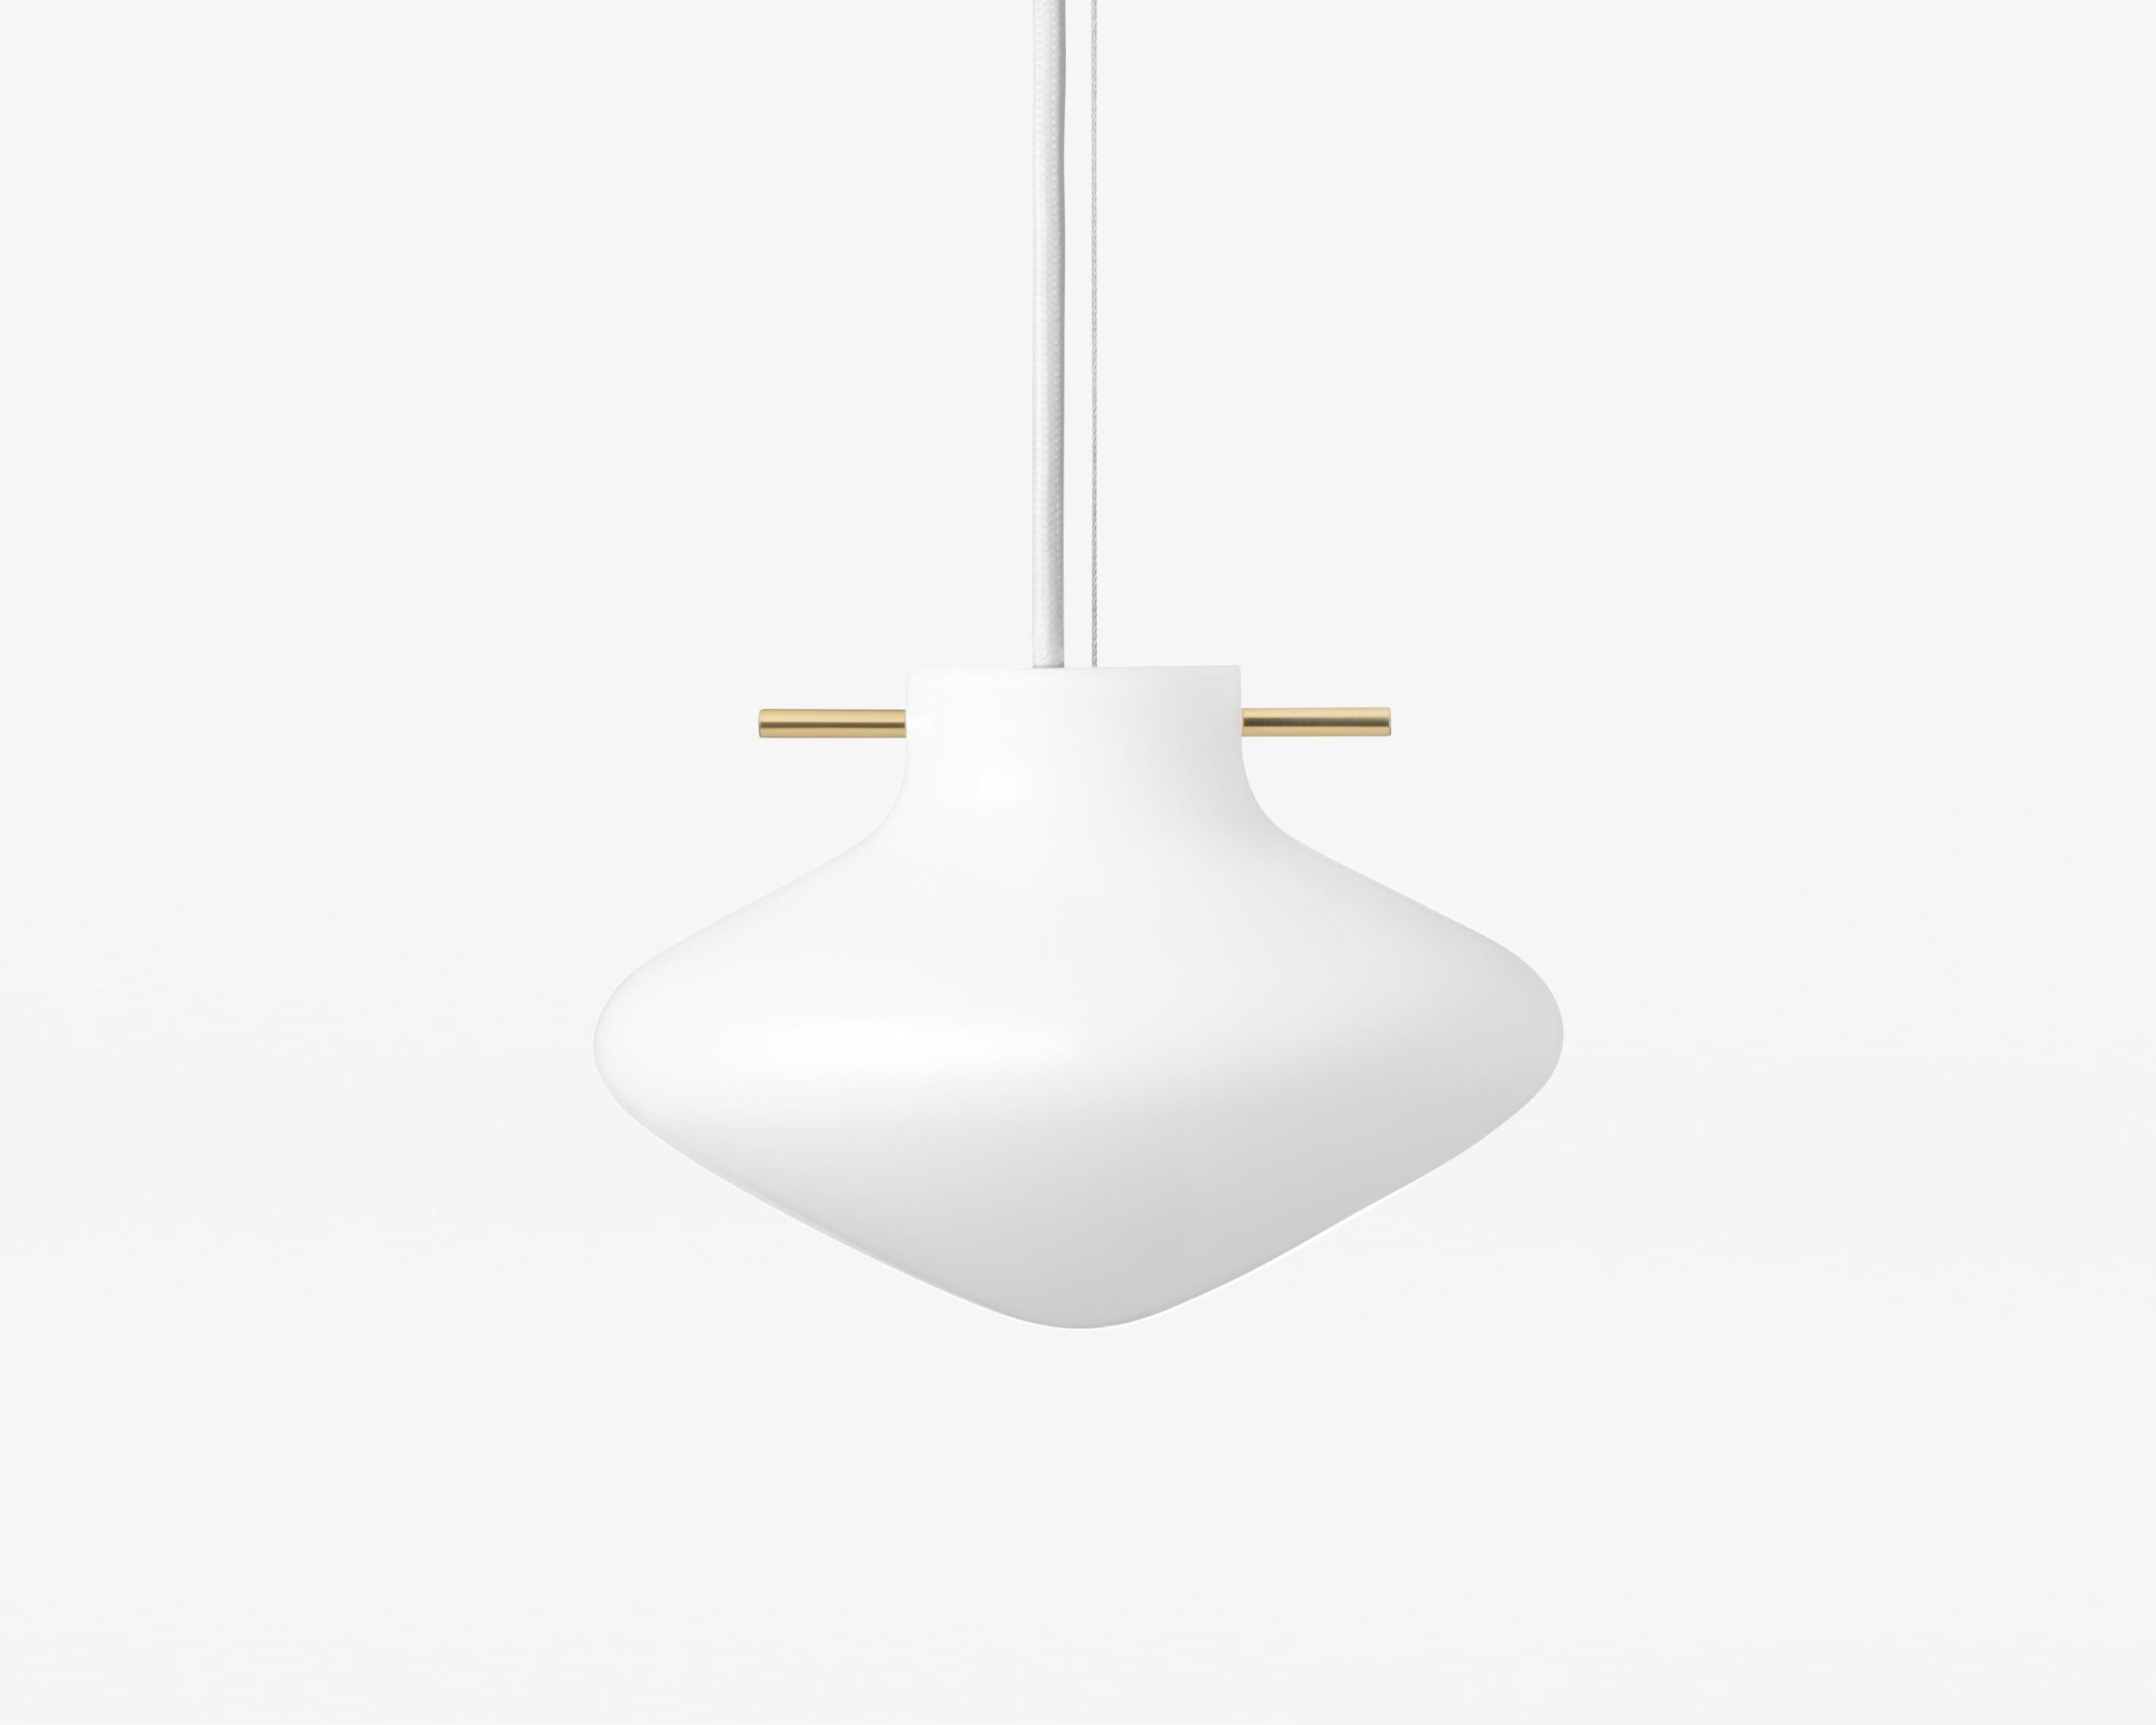 Pendant lamp repose / 175 BY LYFA

Pendant lamp signed by GamFratesi for LYFA

Measures: D.175 mm H.118 mm
Opal glass / Black steel or Brass

Textile wire (black or white) 300cm
Light source: G9 max 60W (110V-230V)

-- 
Repose is a new